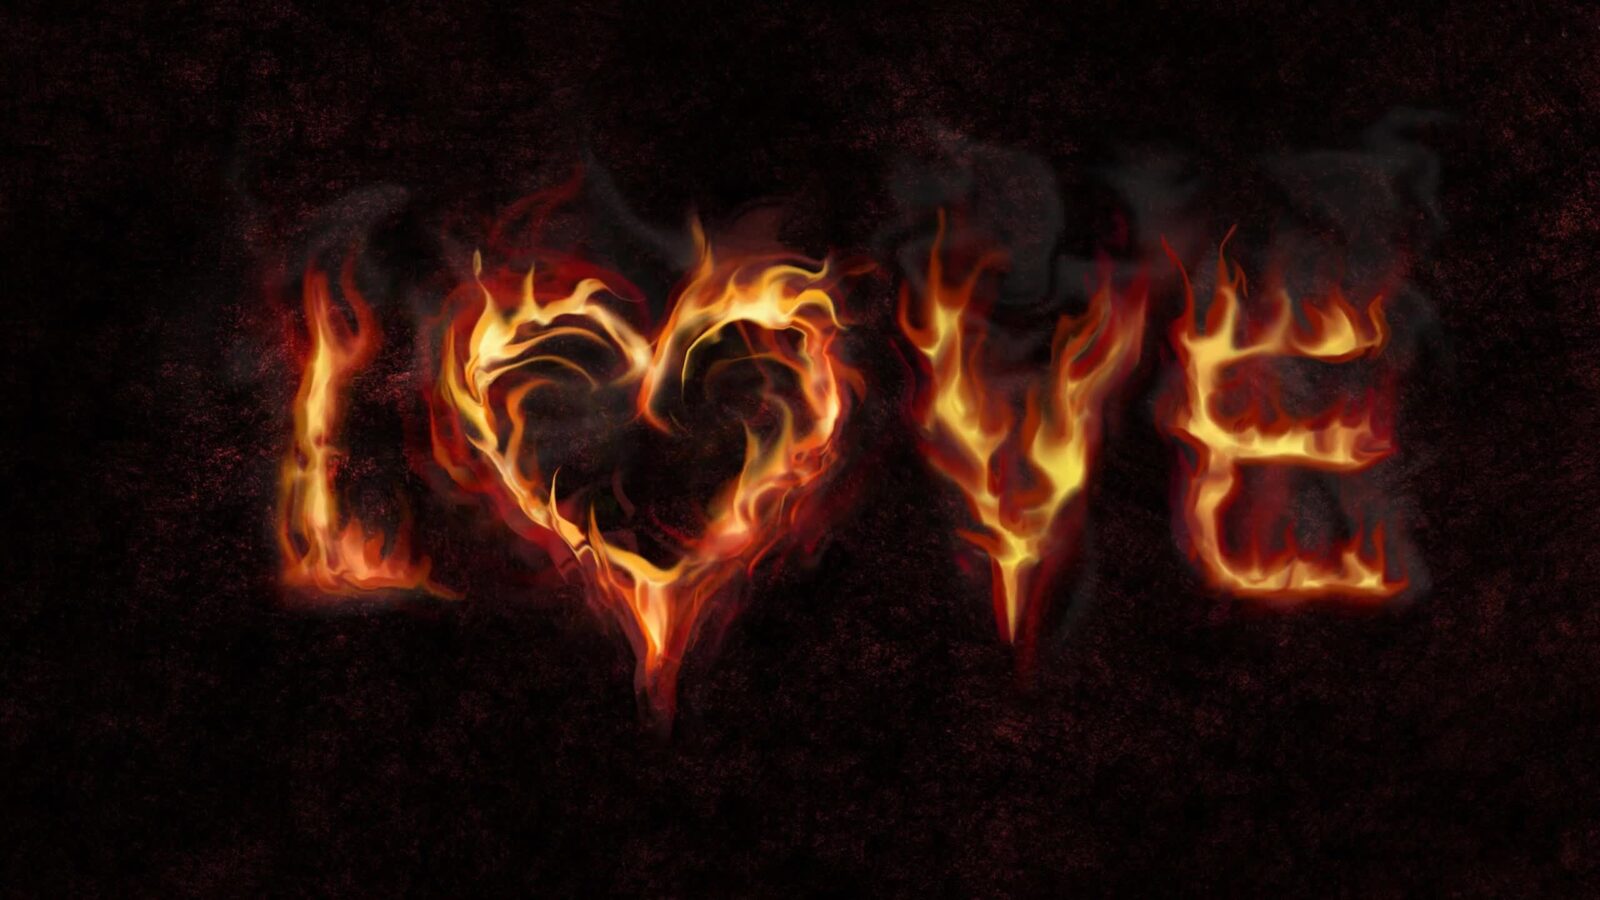 LiveWallpapers4Free.com | Love Black Fire Abstract 2K - Free Live Wallpaper